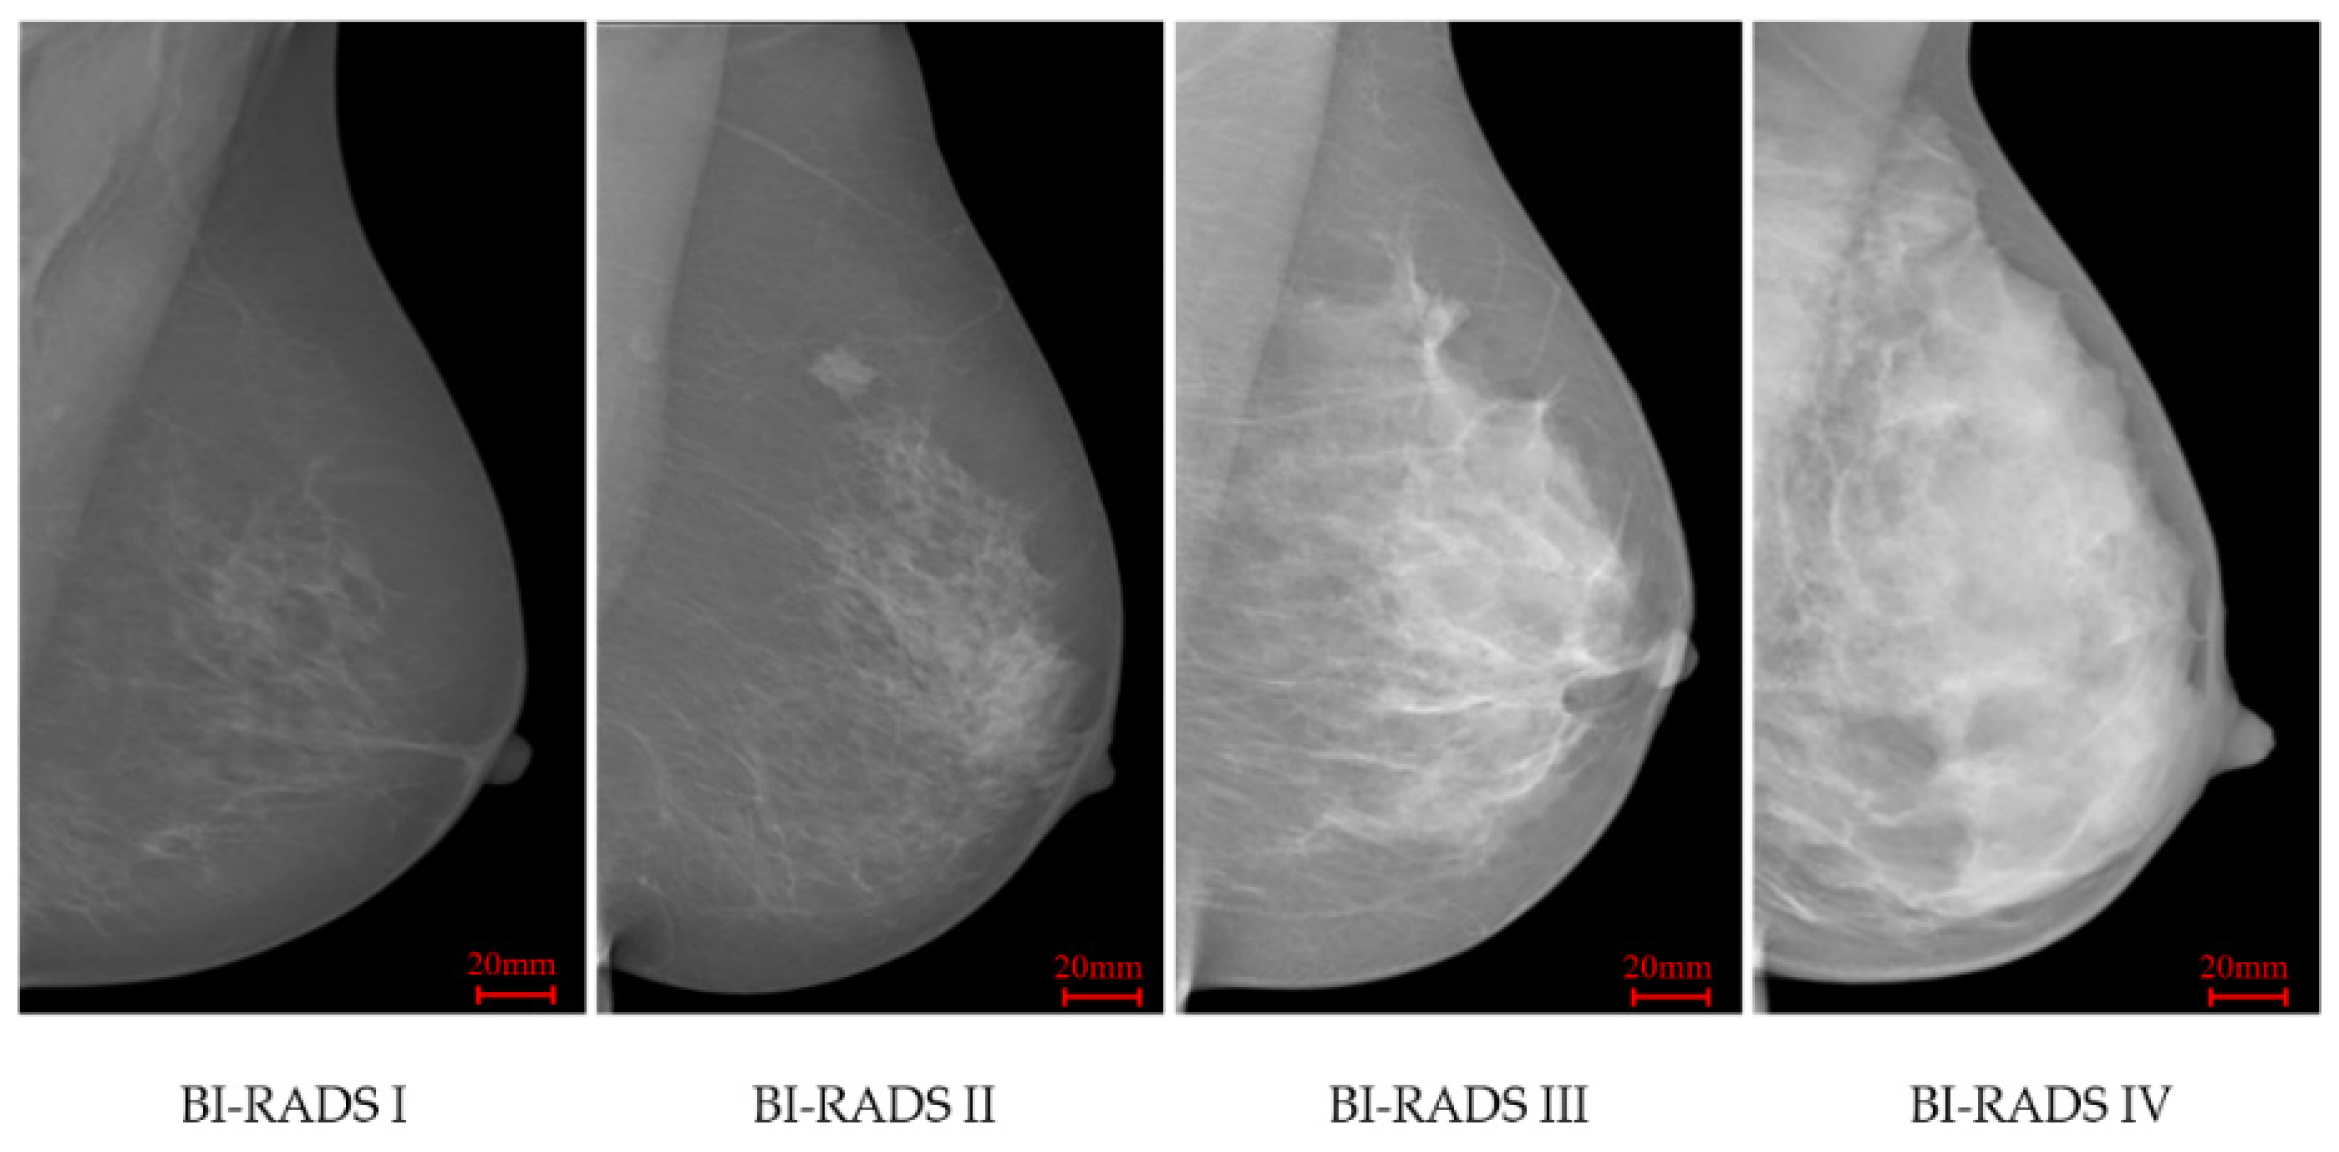 J. Imaging | Free Full-Text | Novel Texture Feature Descriptors Based on  Multi-Fractal Analysis and LBP for Classifying Breast Density in Mammograms